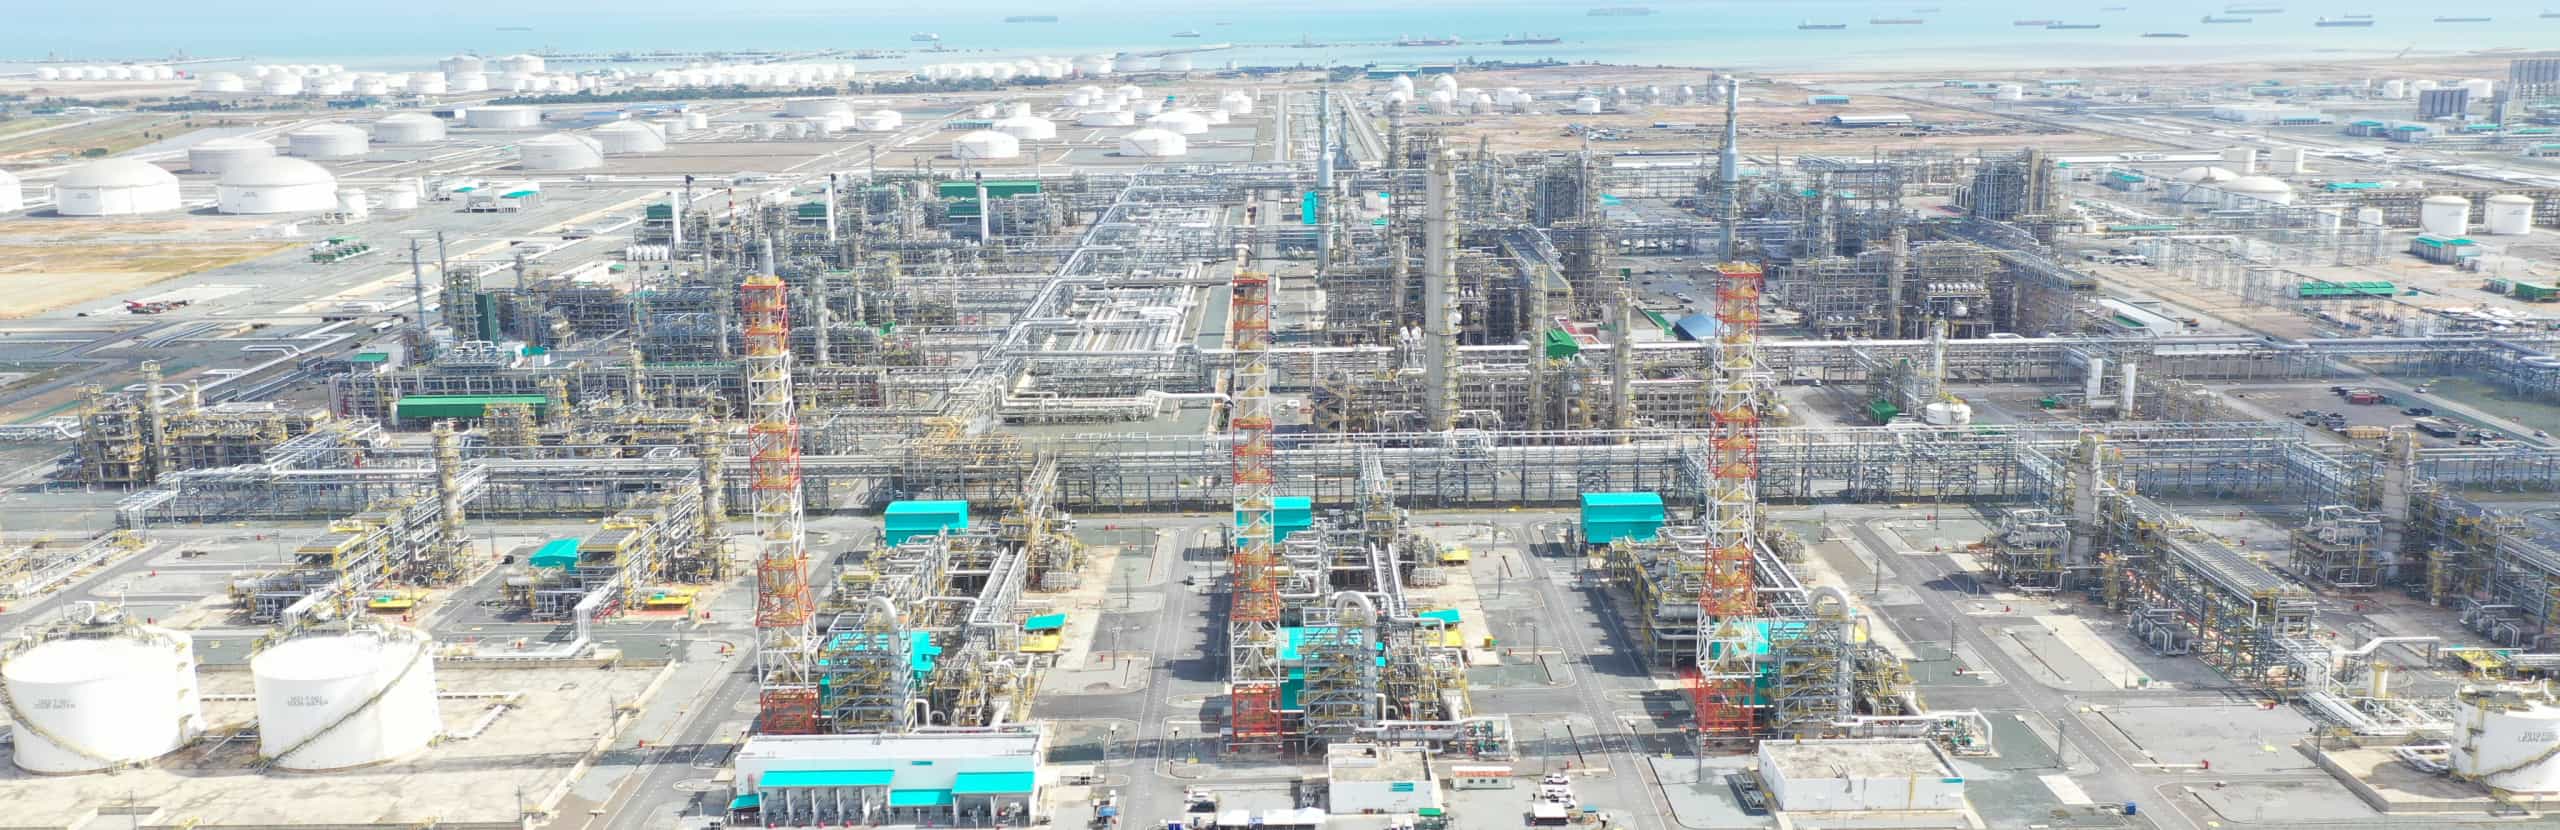 Largest refinery complex in Malaysia